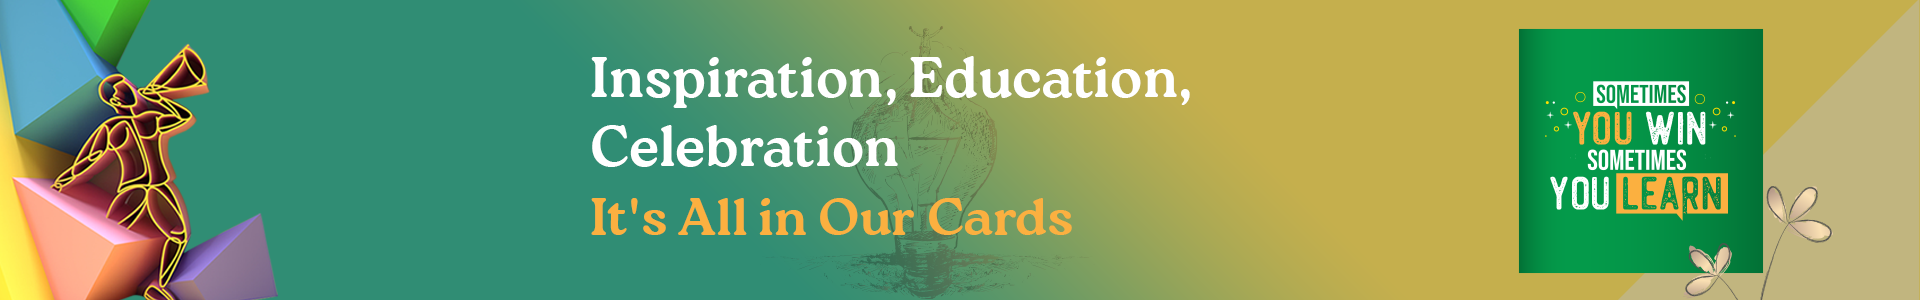 EducationalExpress Yourself Digitallywith Educational Cards